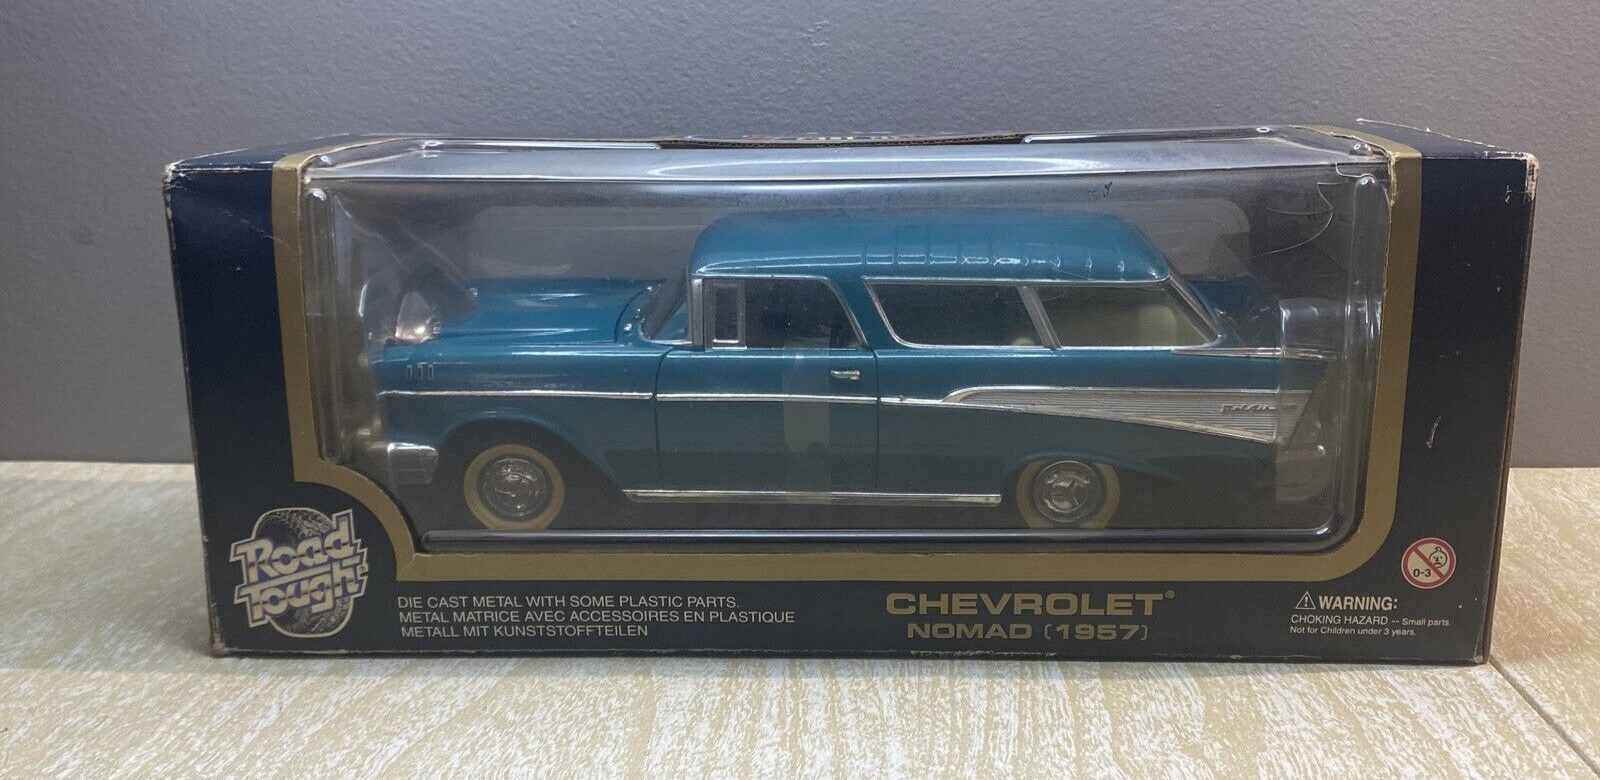 Road Tough 1957 Chevy Bel Air Nomad Station Wagon 1:18 Scale Diecast Car 92088 - $29.92